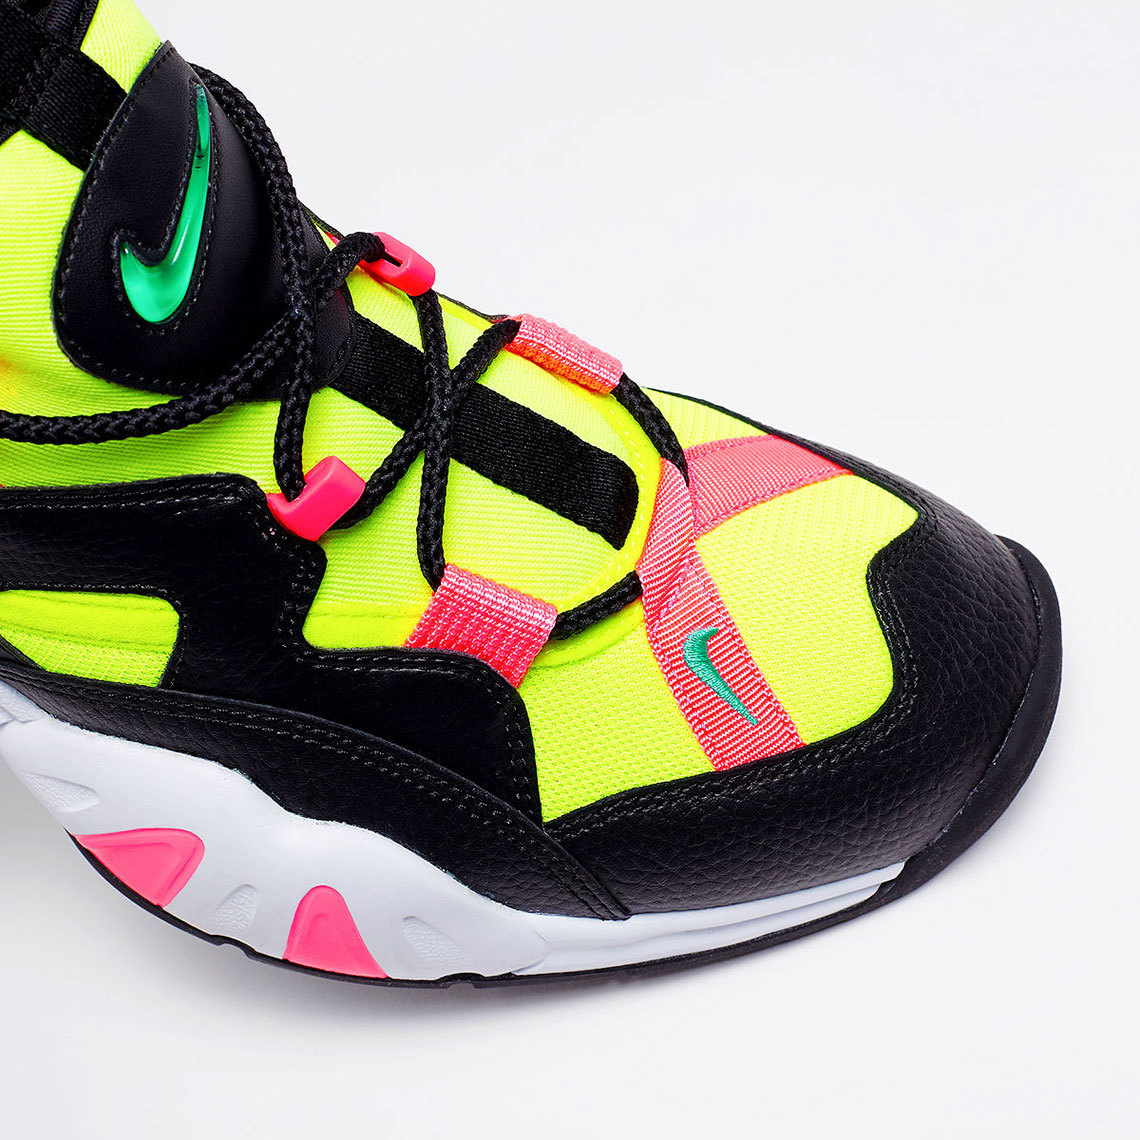 Nike's Vibrant Air Scream LWP Is A Blast From The Past